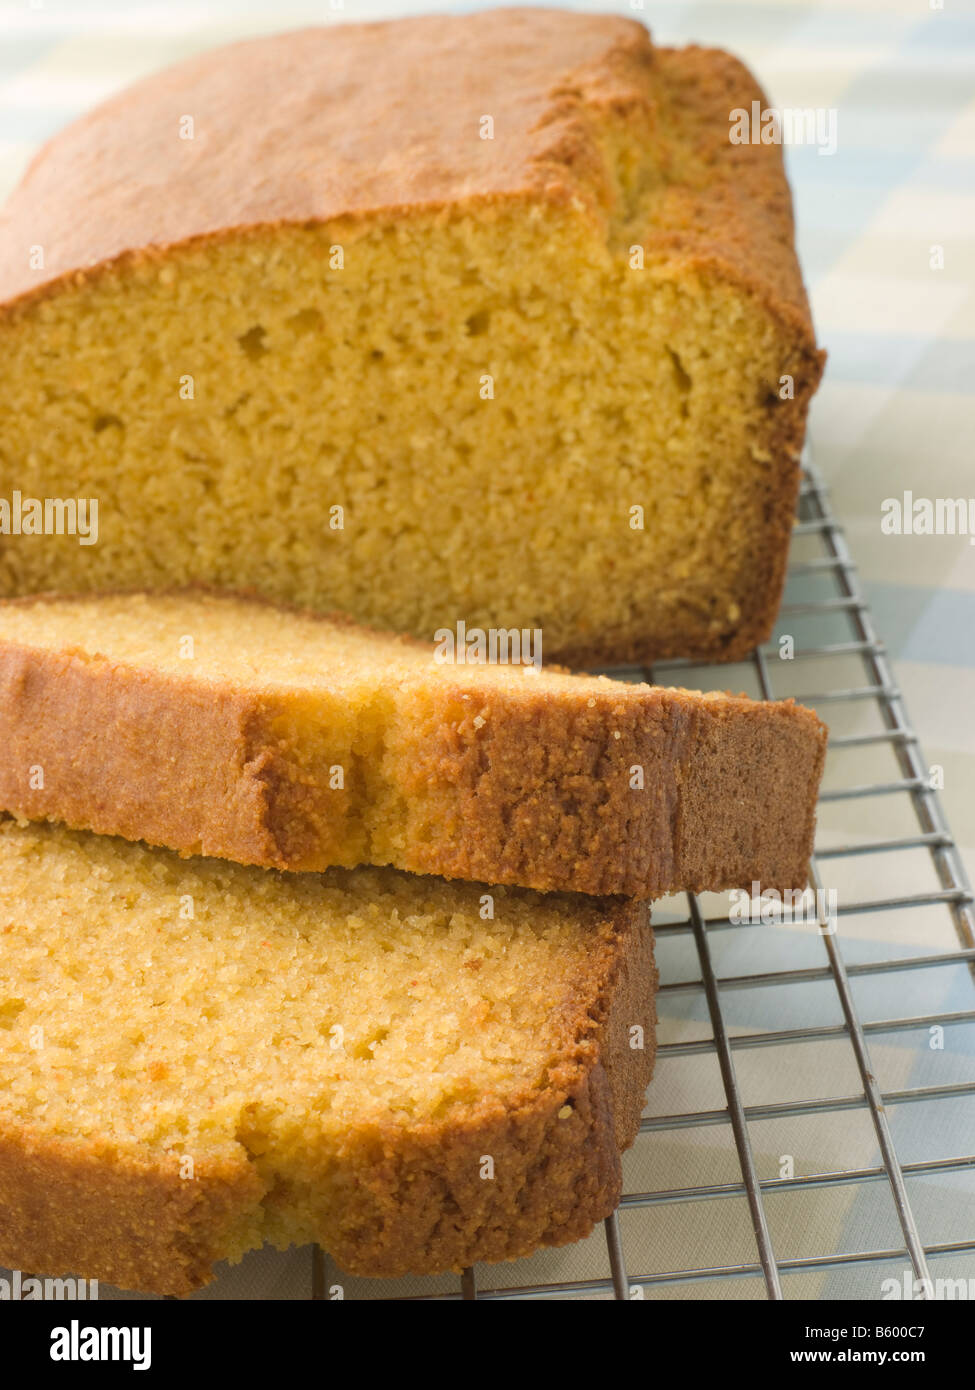 Loaf of Corn Bread on a Cooling rack Stock Photo